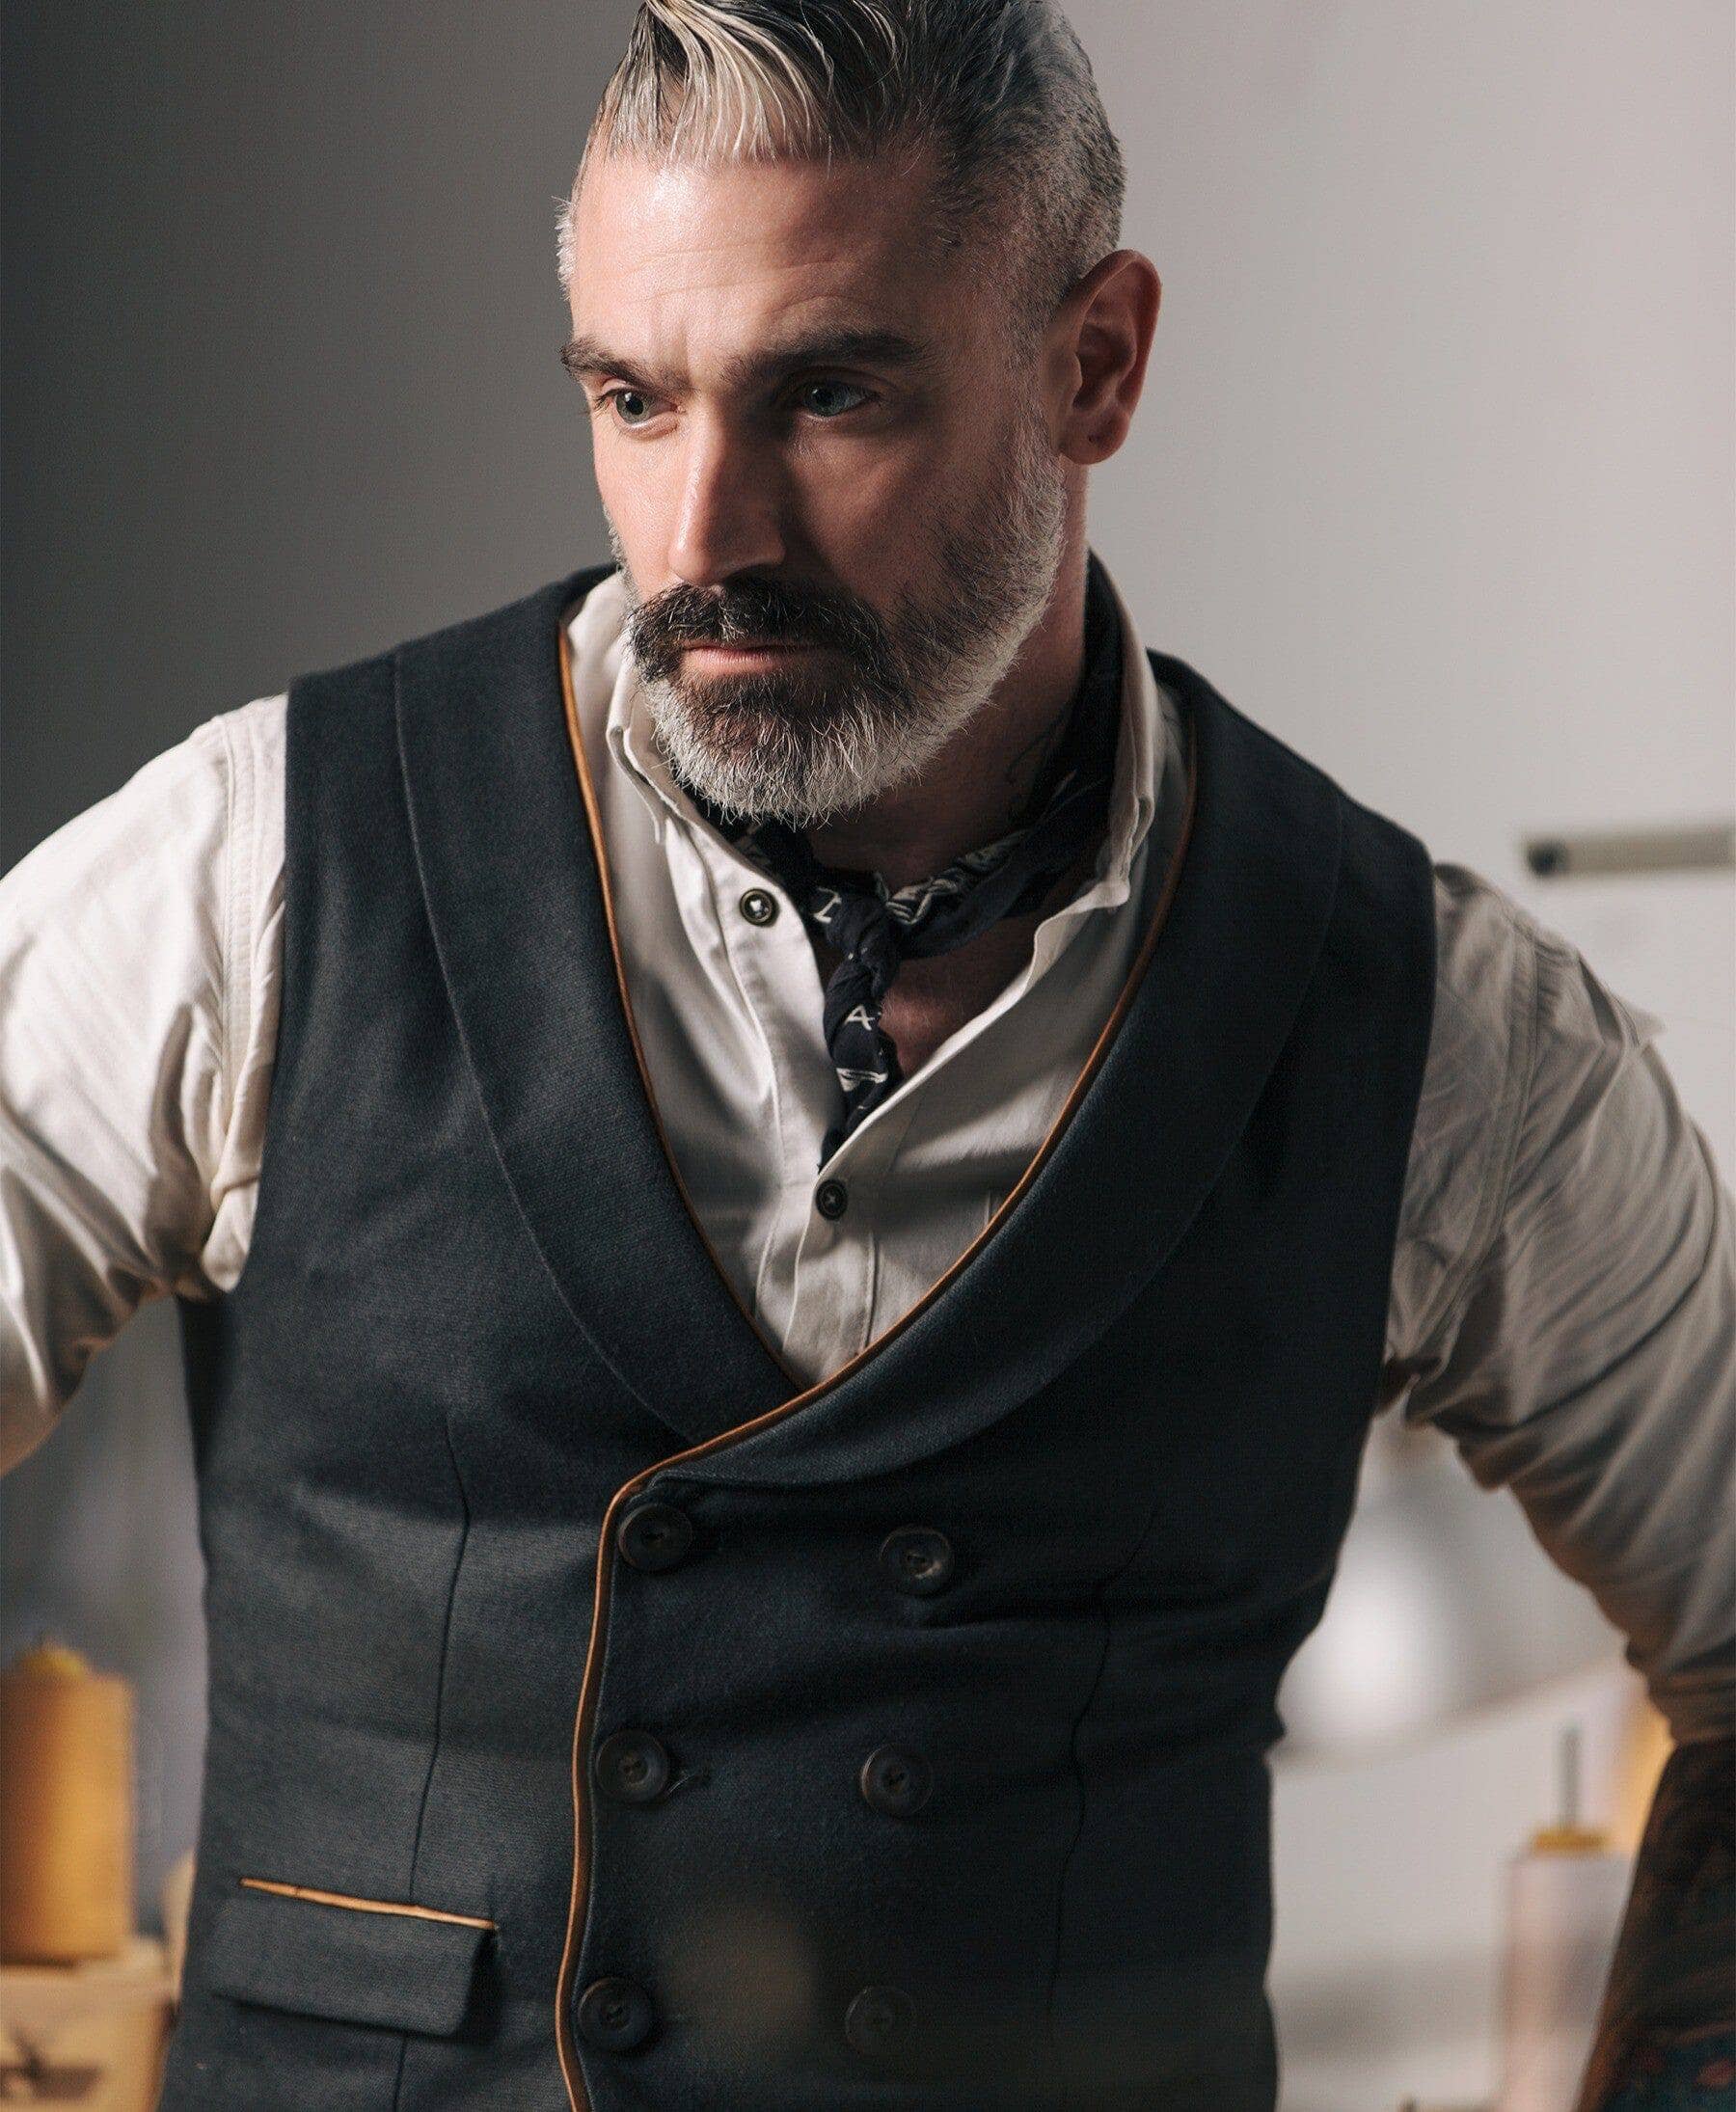 Double Breasted Shawl Collar WaistCoat Made to Measure - Sheehan and Co.